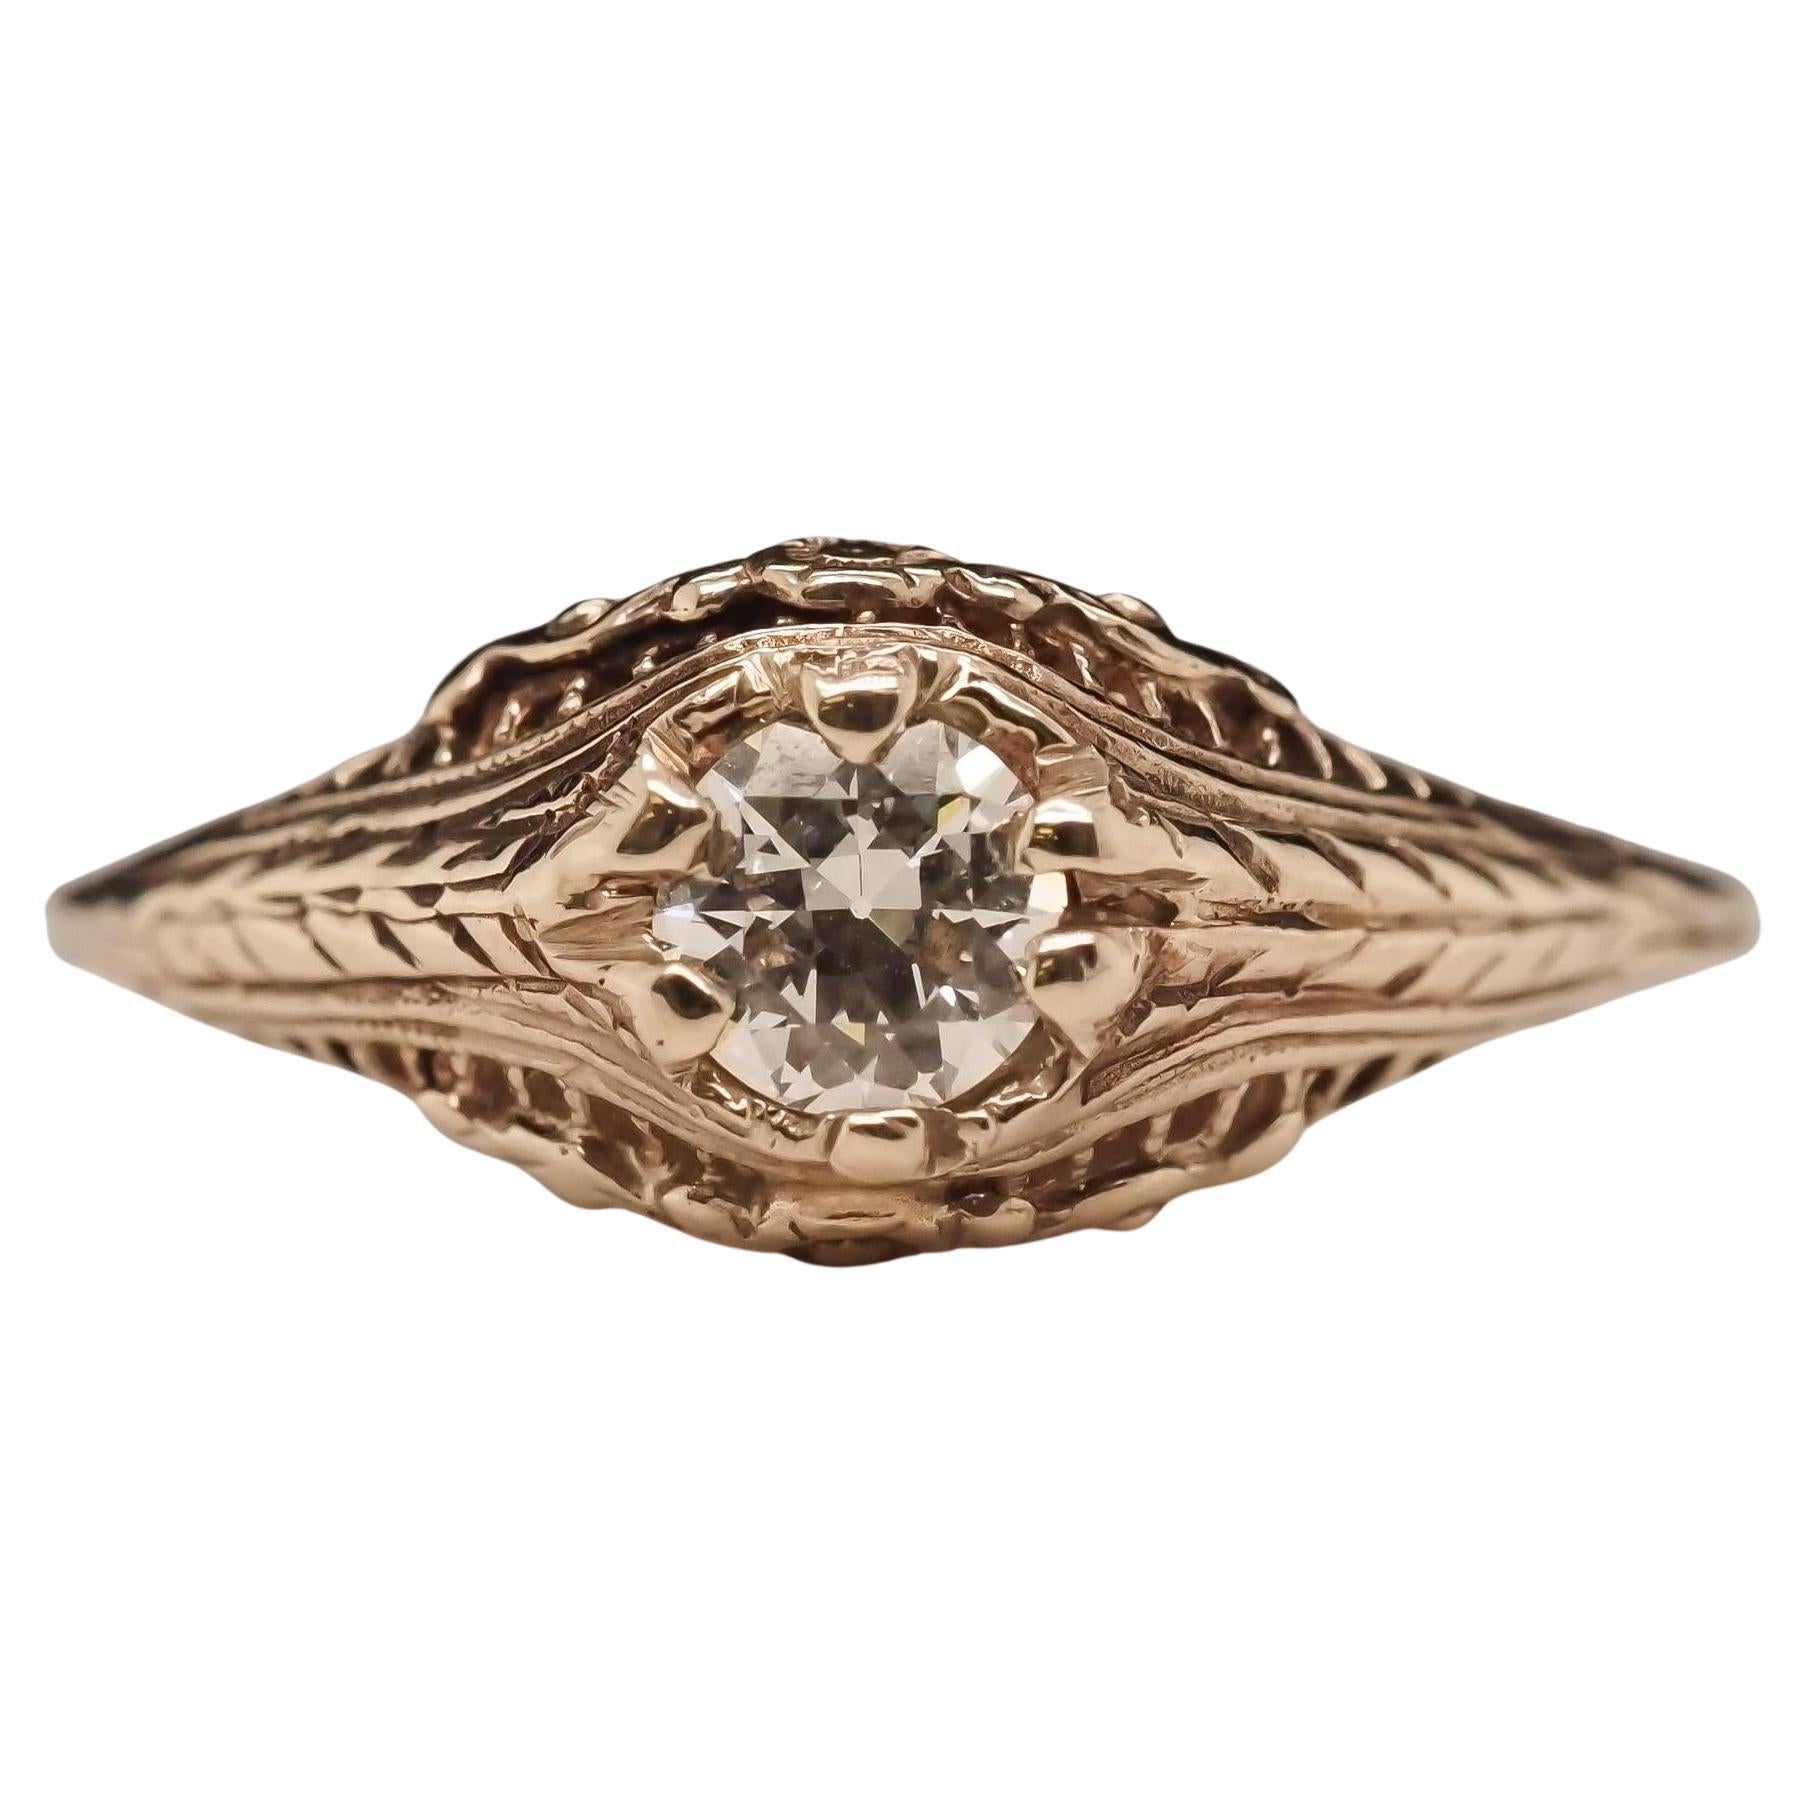 Circa 1940s 14K White Gold Filigree .40ct Old European Brilliant Engagement Ring For Sale